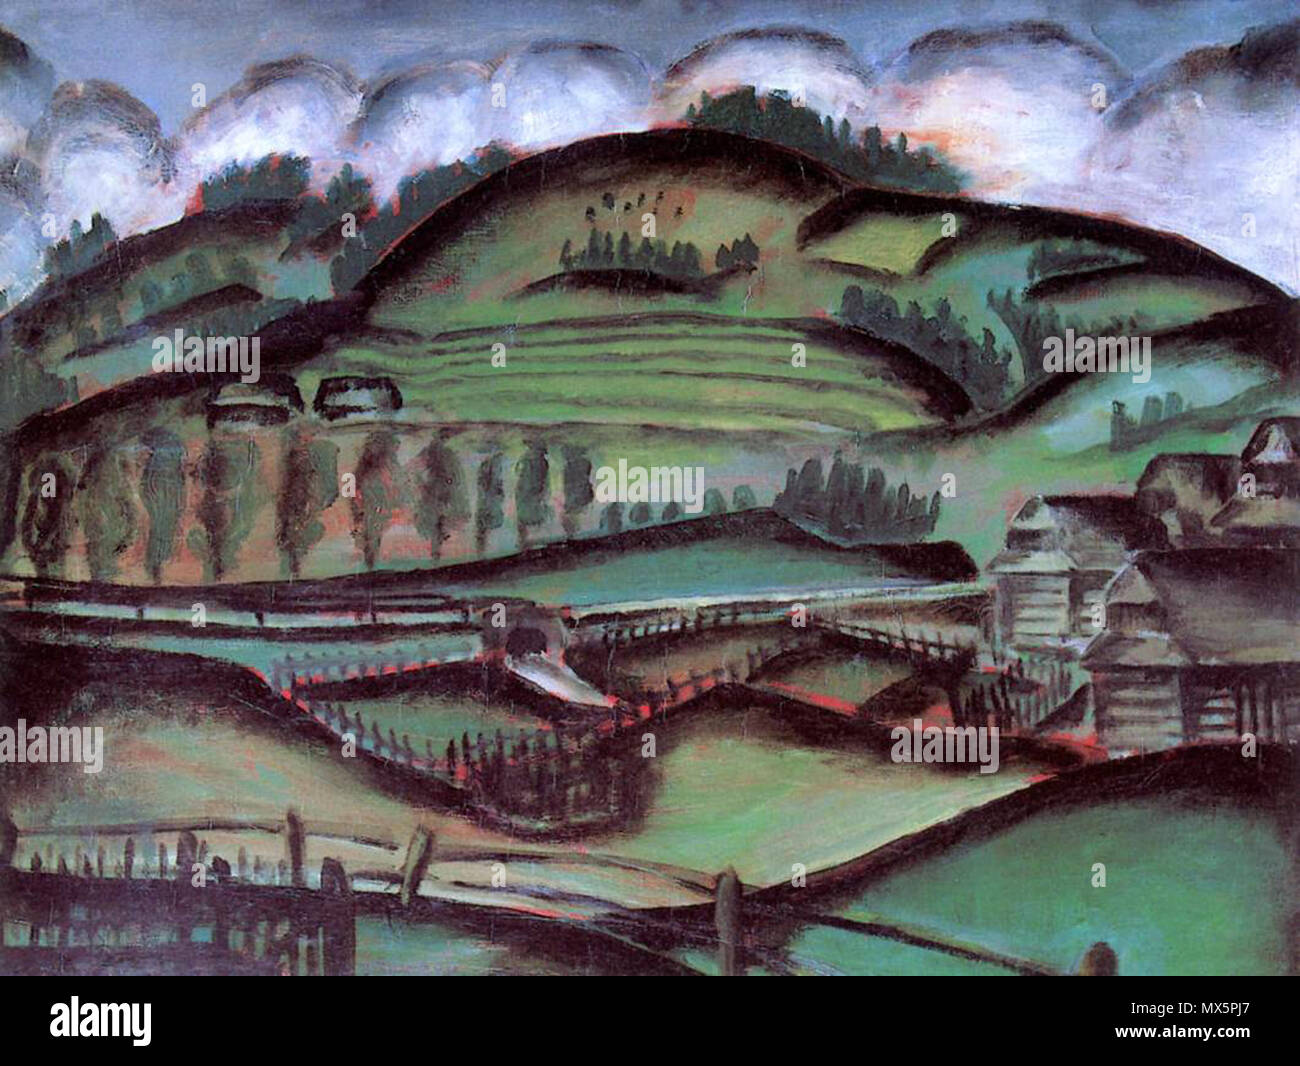 . This file has no description, and may be lacking other information. Please provide a meaningful description of this file. . Ede Bohacsek (1889-1915) 90 Bohacsek, Ede - Landscape, Mountain Village (1913) Stock Photo